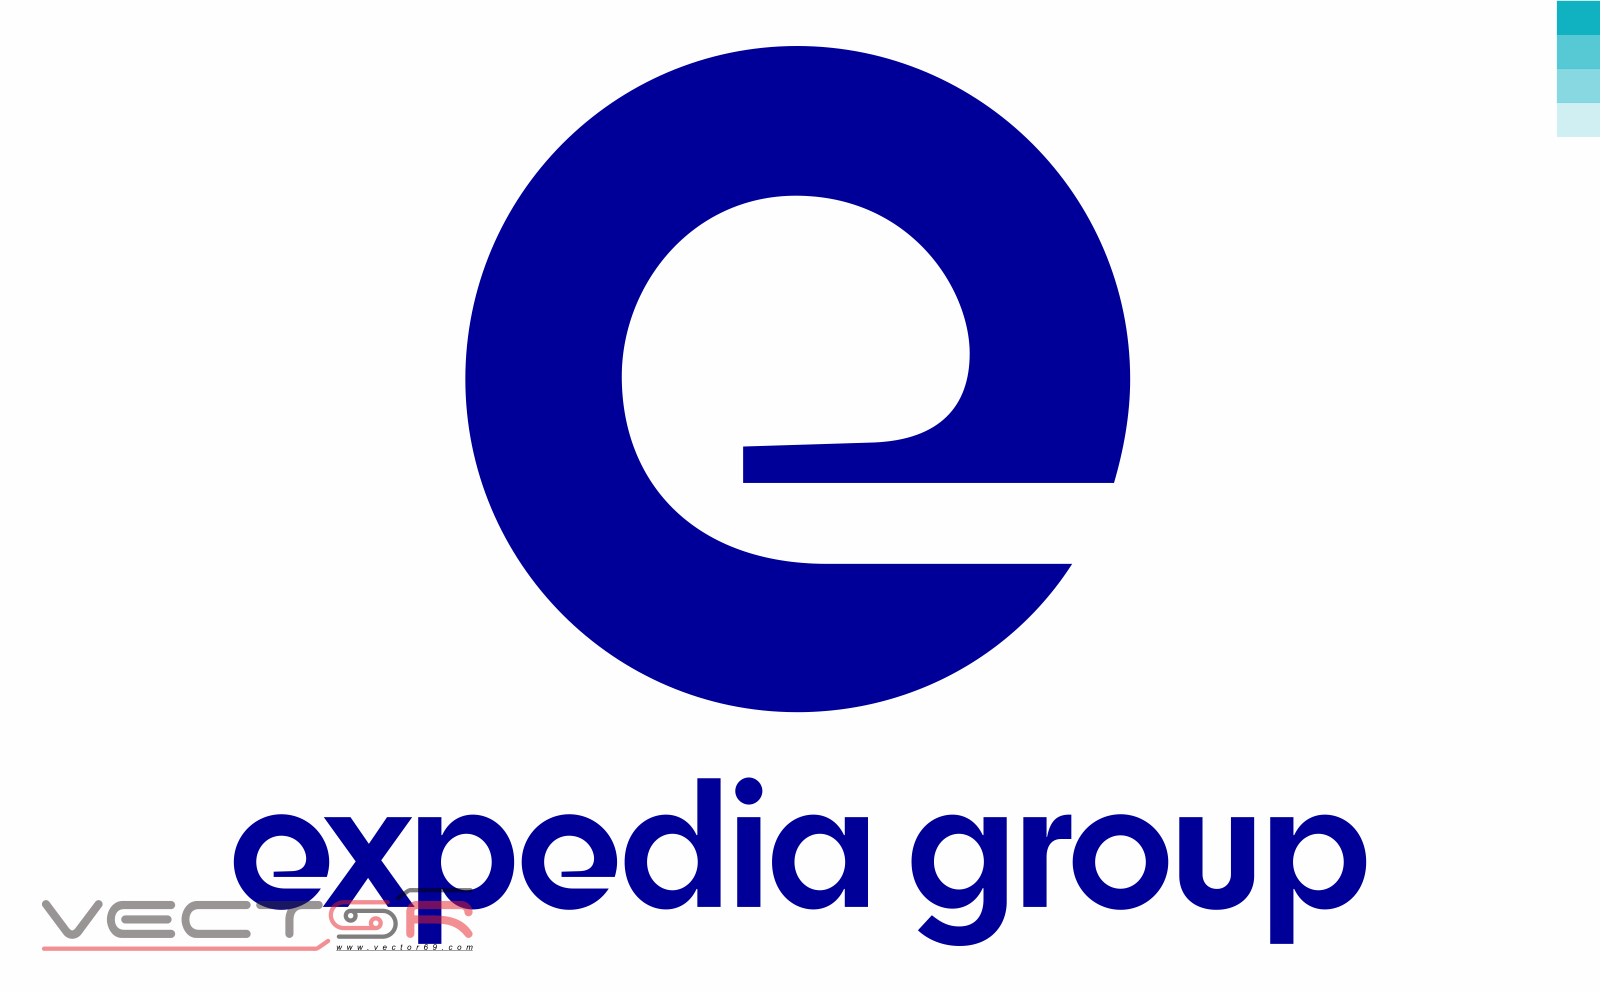 Expedia Group Logo - Download Vector File SVG (Scalable Vector Graphics)